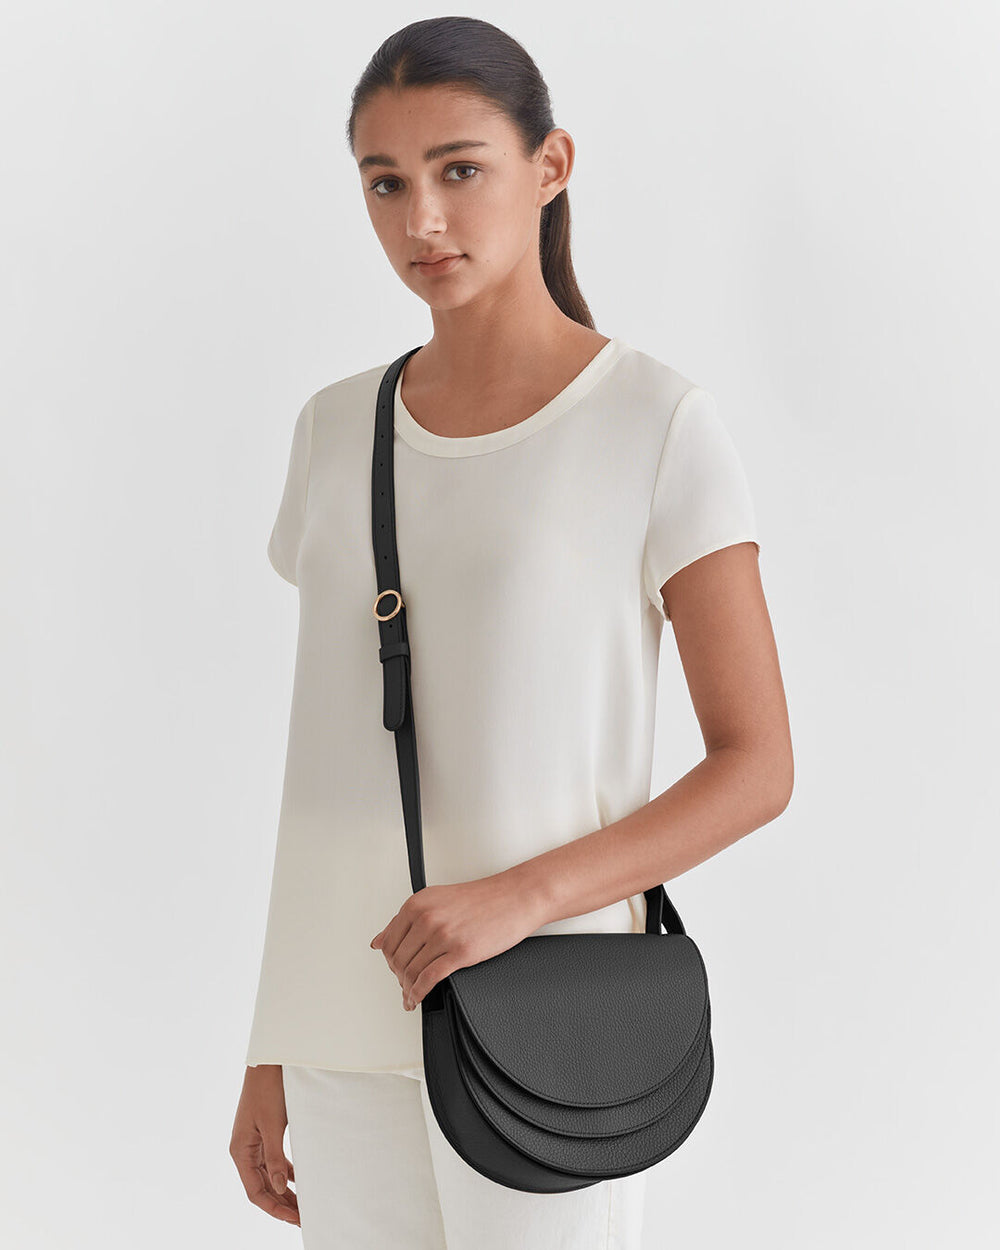 Woman standing with a shoulder bag